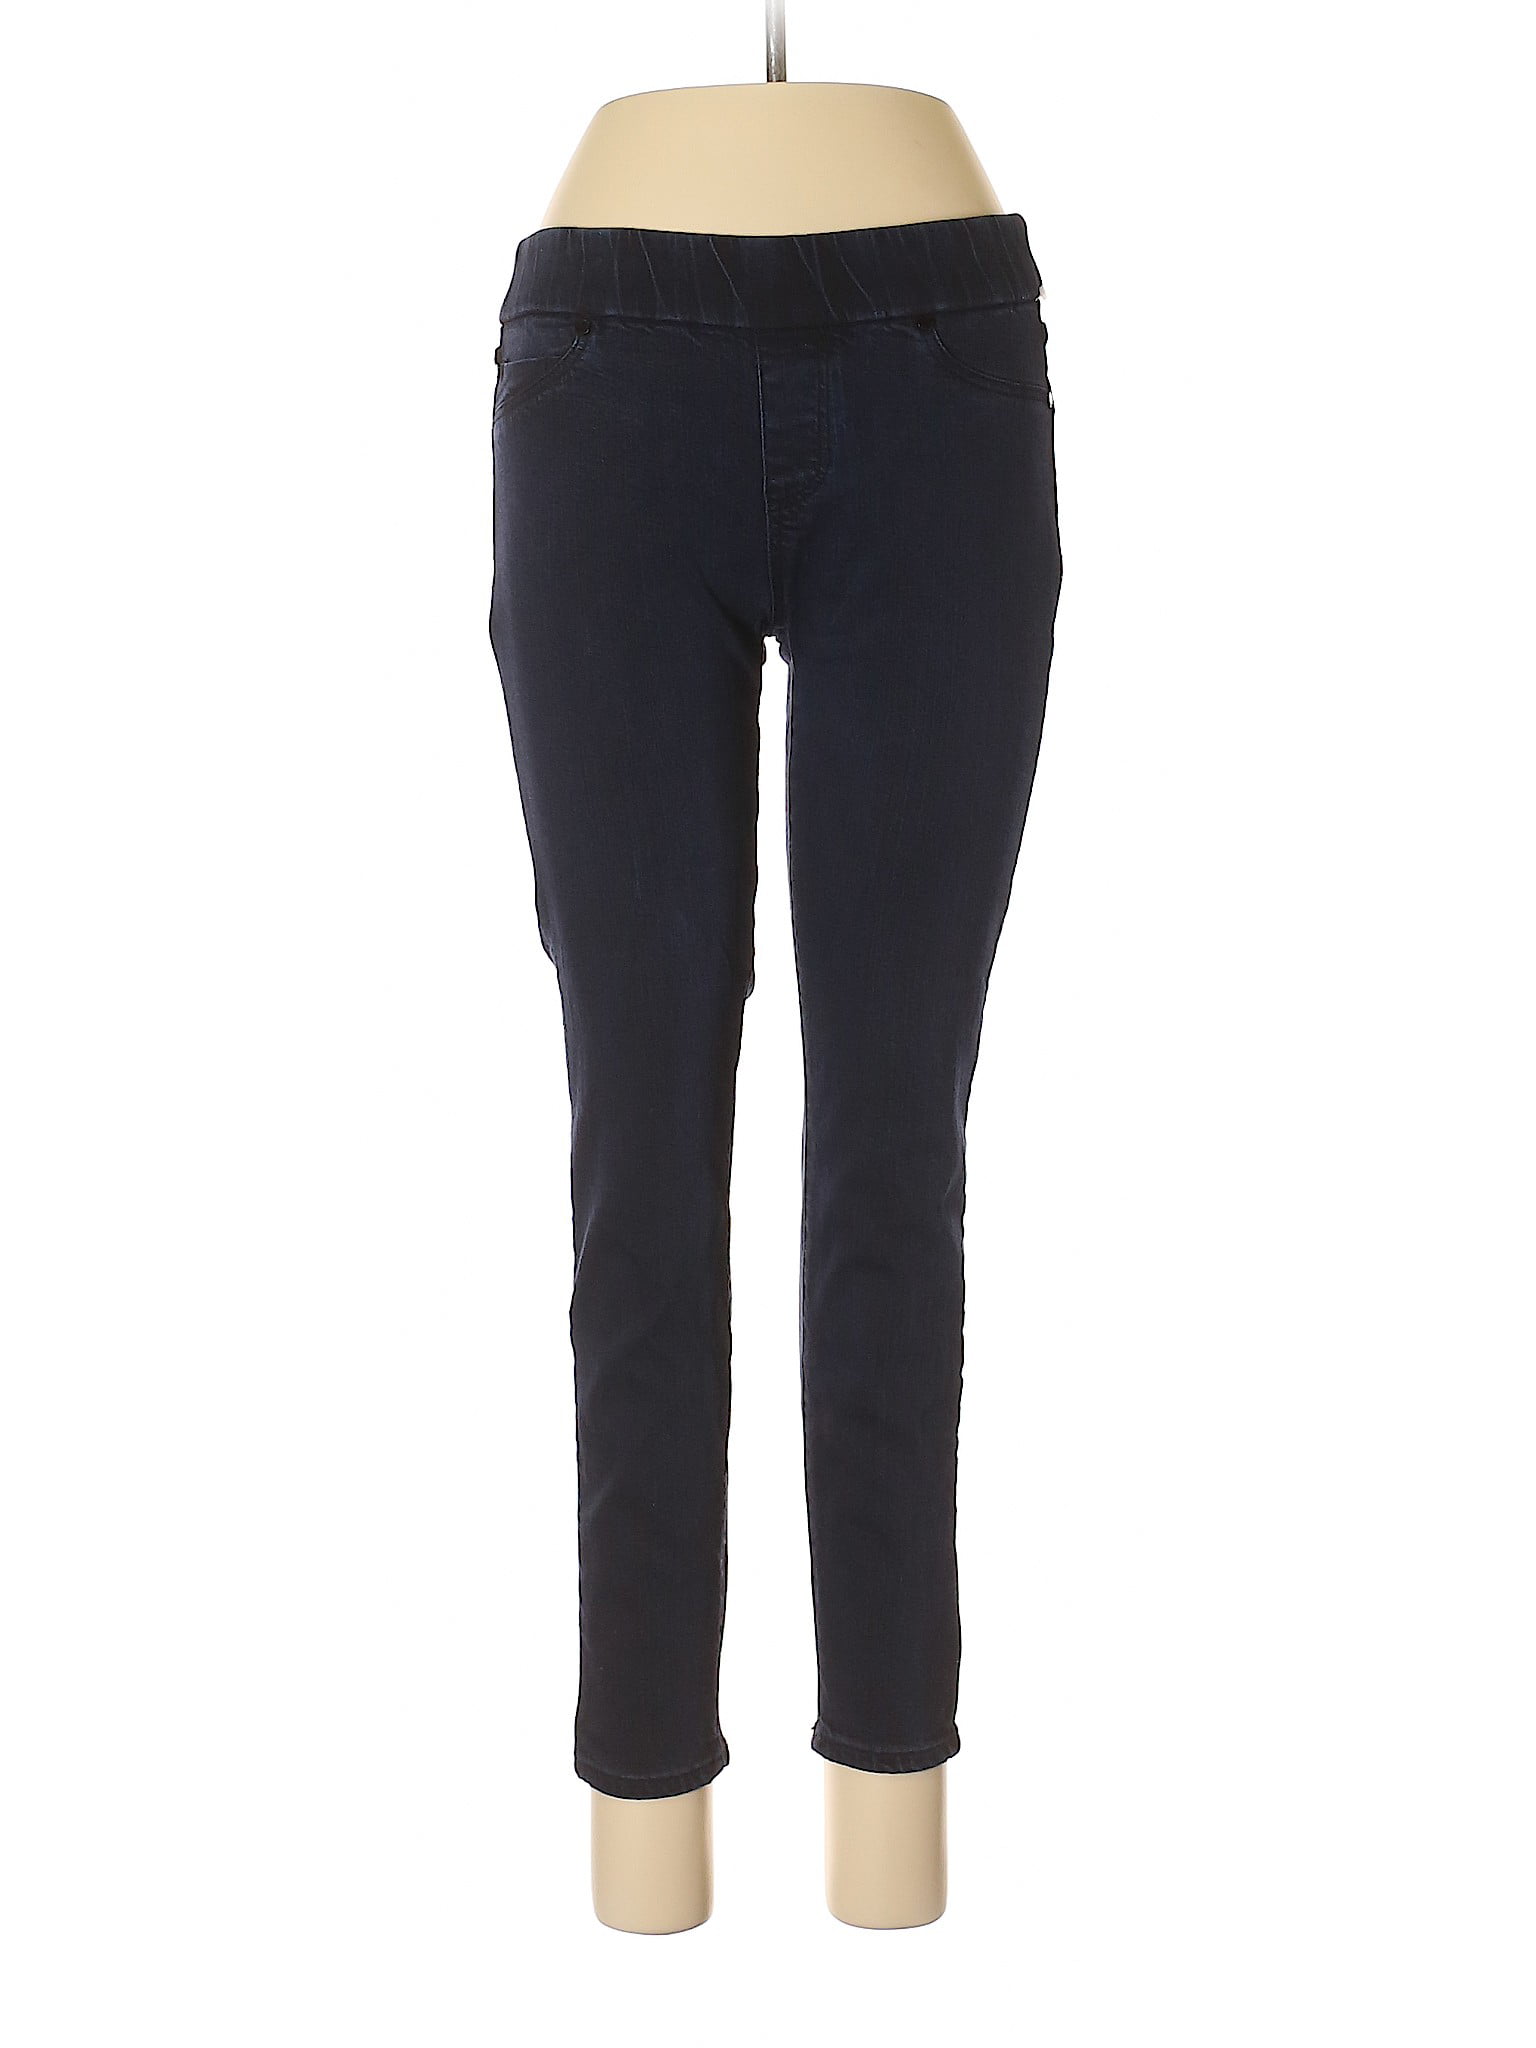 Liverpool Jeans - Pre-Owned Liverpool Jeans Company Women's Size 6 ...